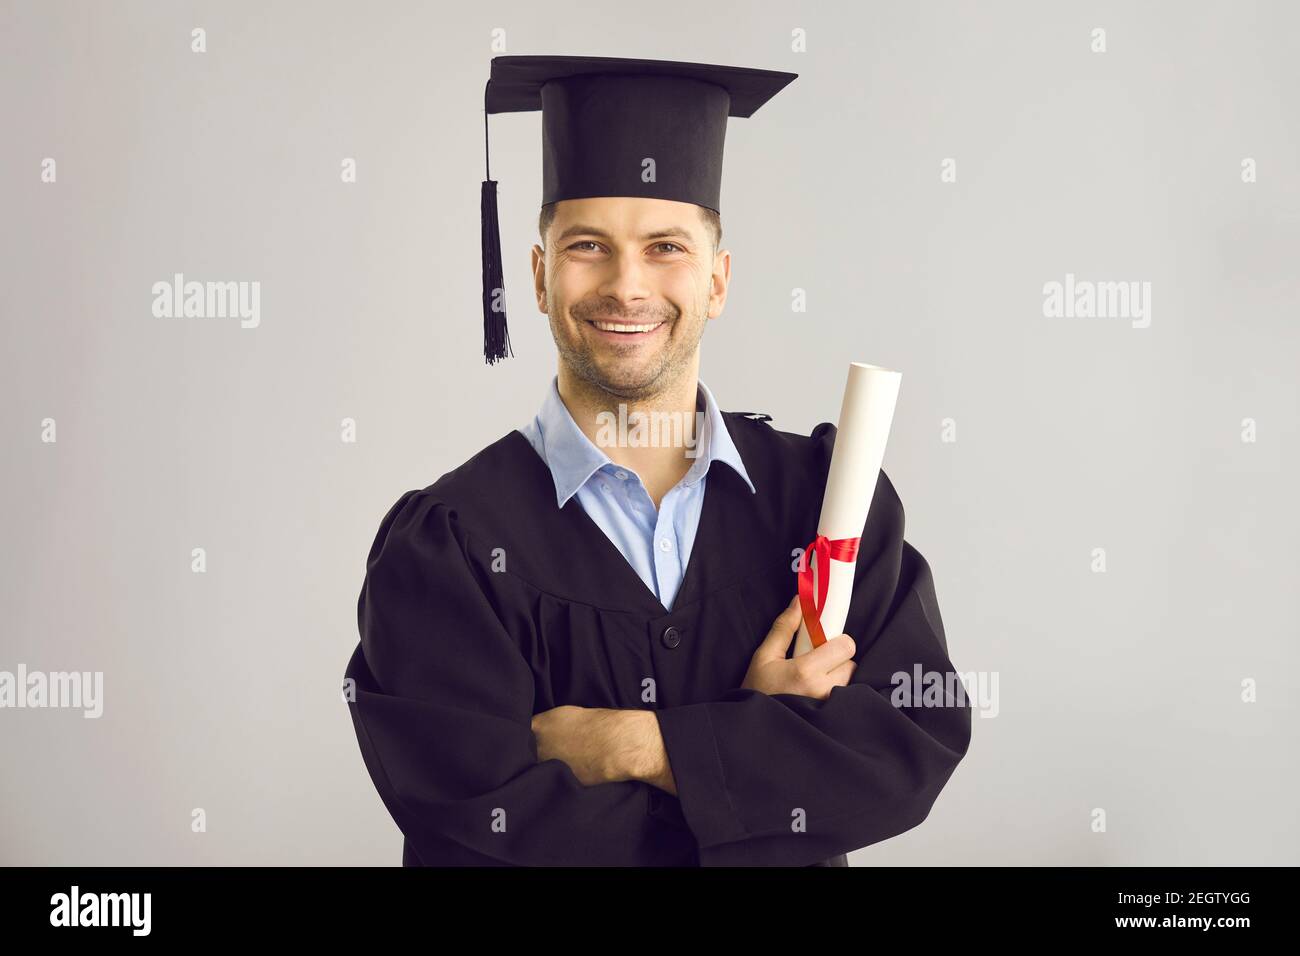 Studio portrait of happy university graduate holding his diploma and smiling at camera Stock Photo